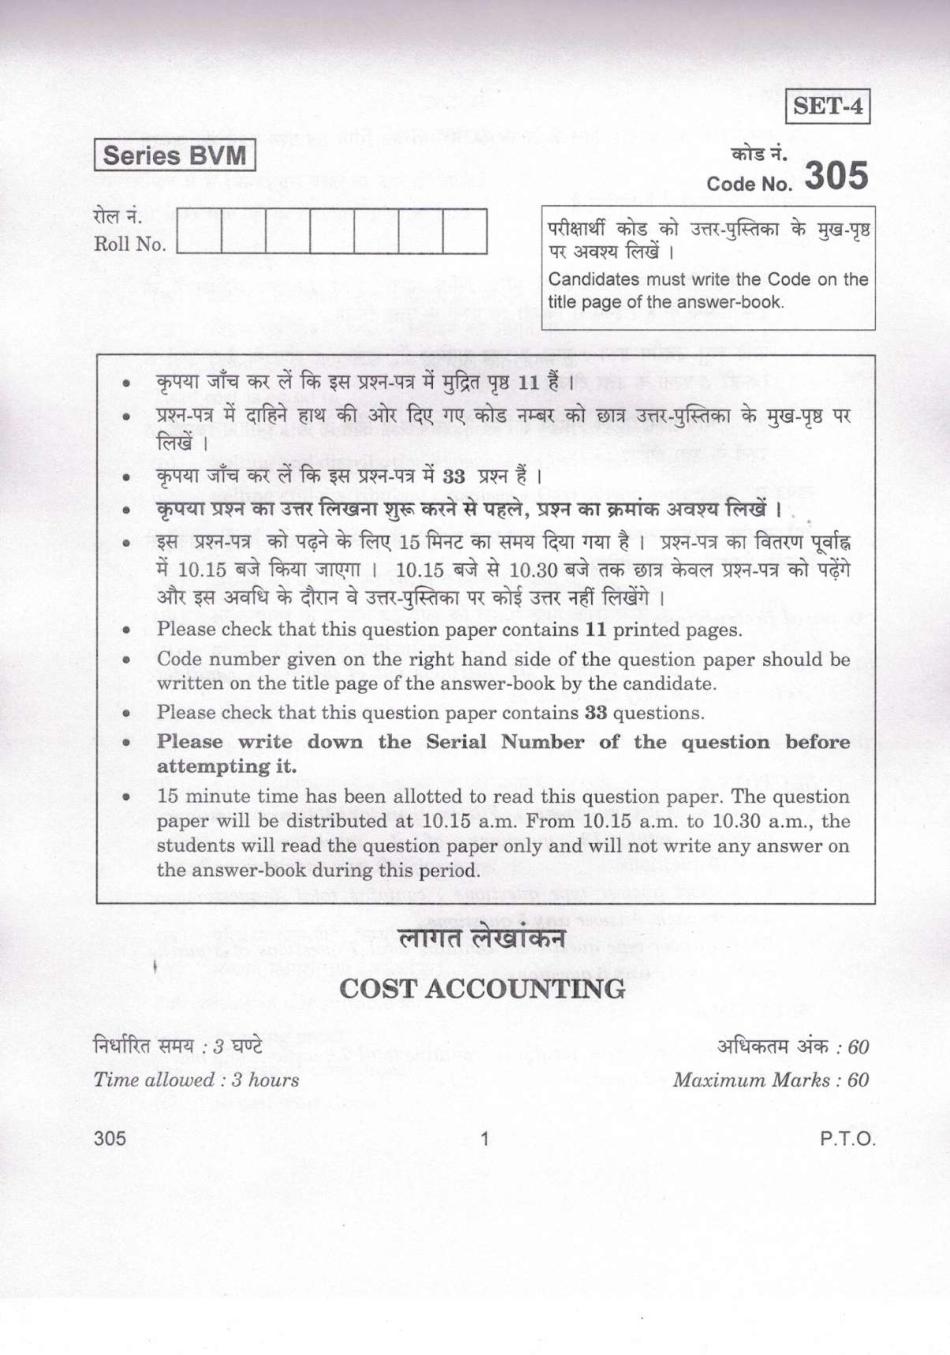 CBSE Class 12 Cost Accounting Question Paper 2019 - Page 1